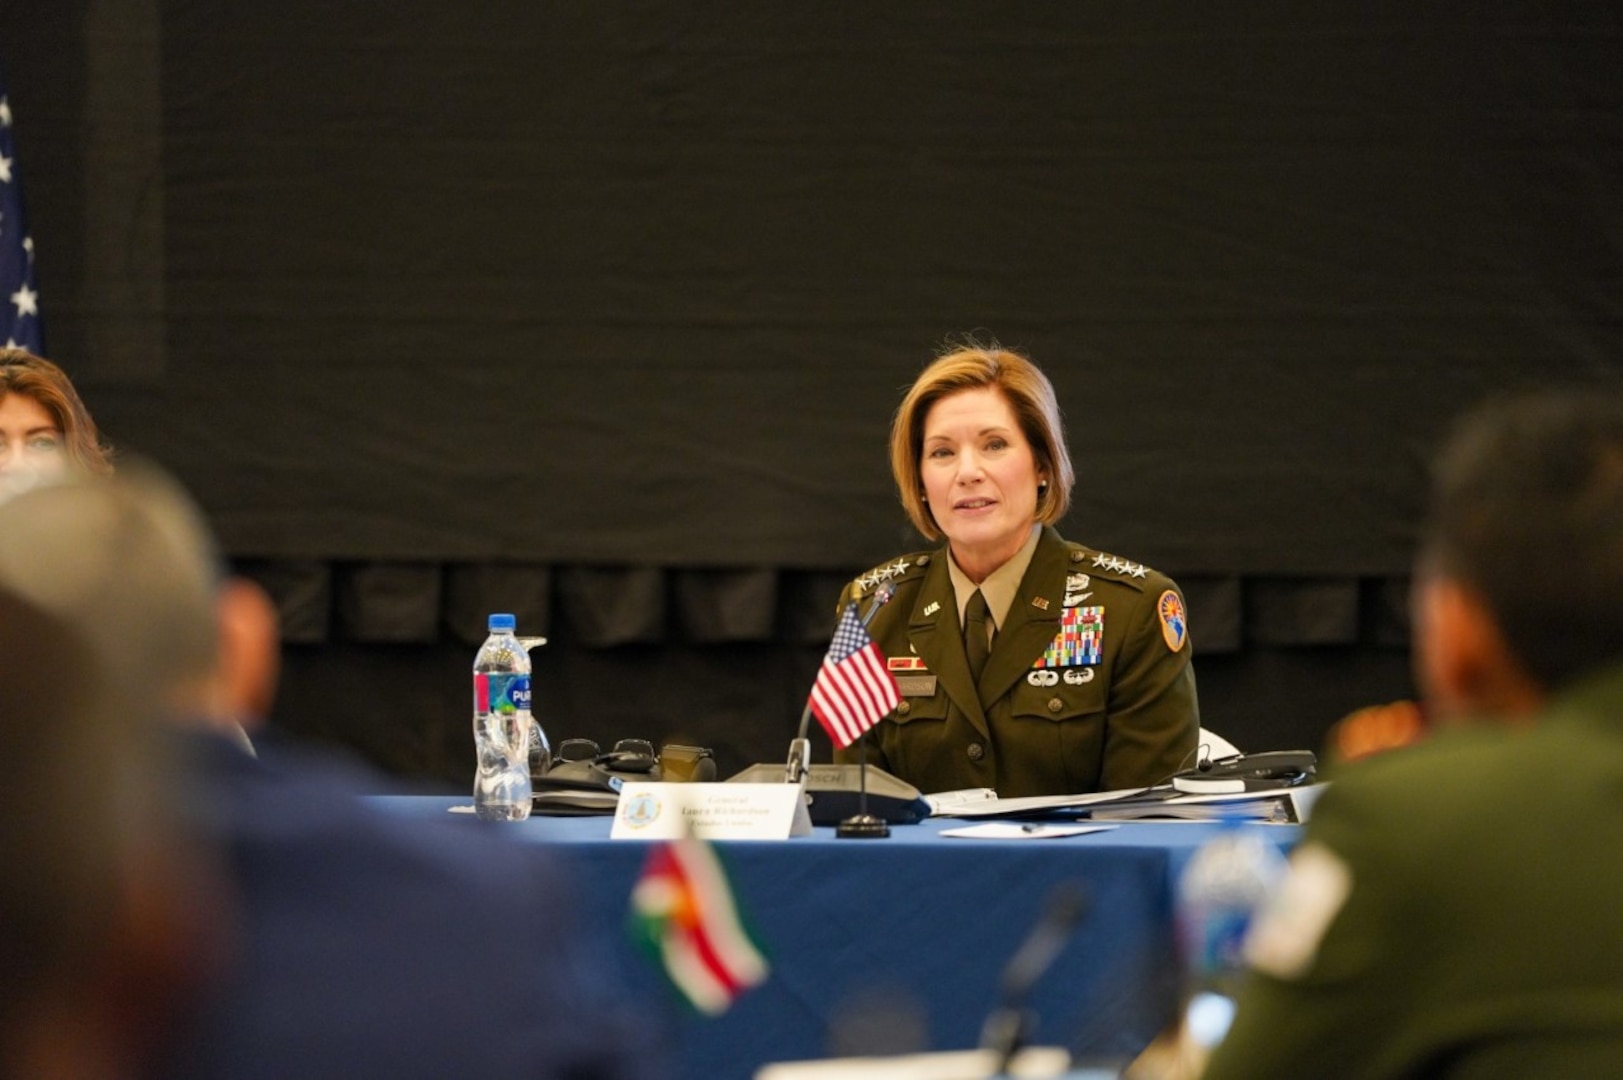 Gen. Laura J. Richardson addresses attendees during the opening ceremony of the South American Defense Conference 2022.